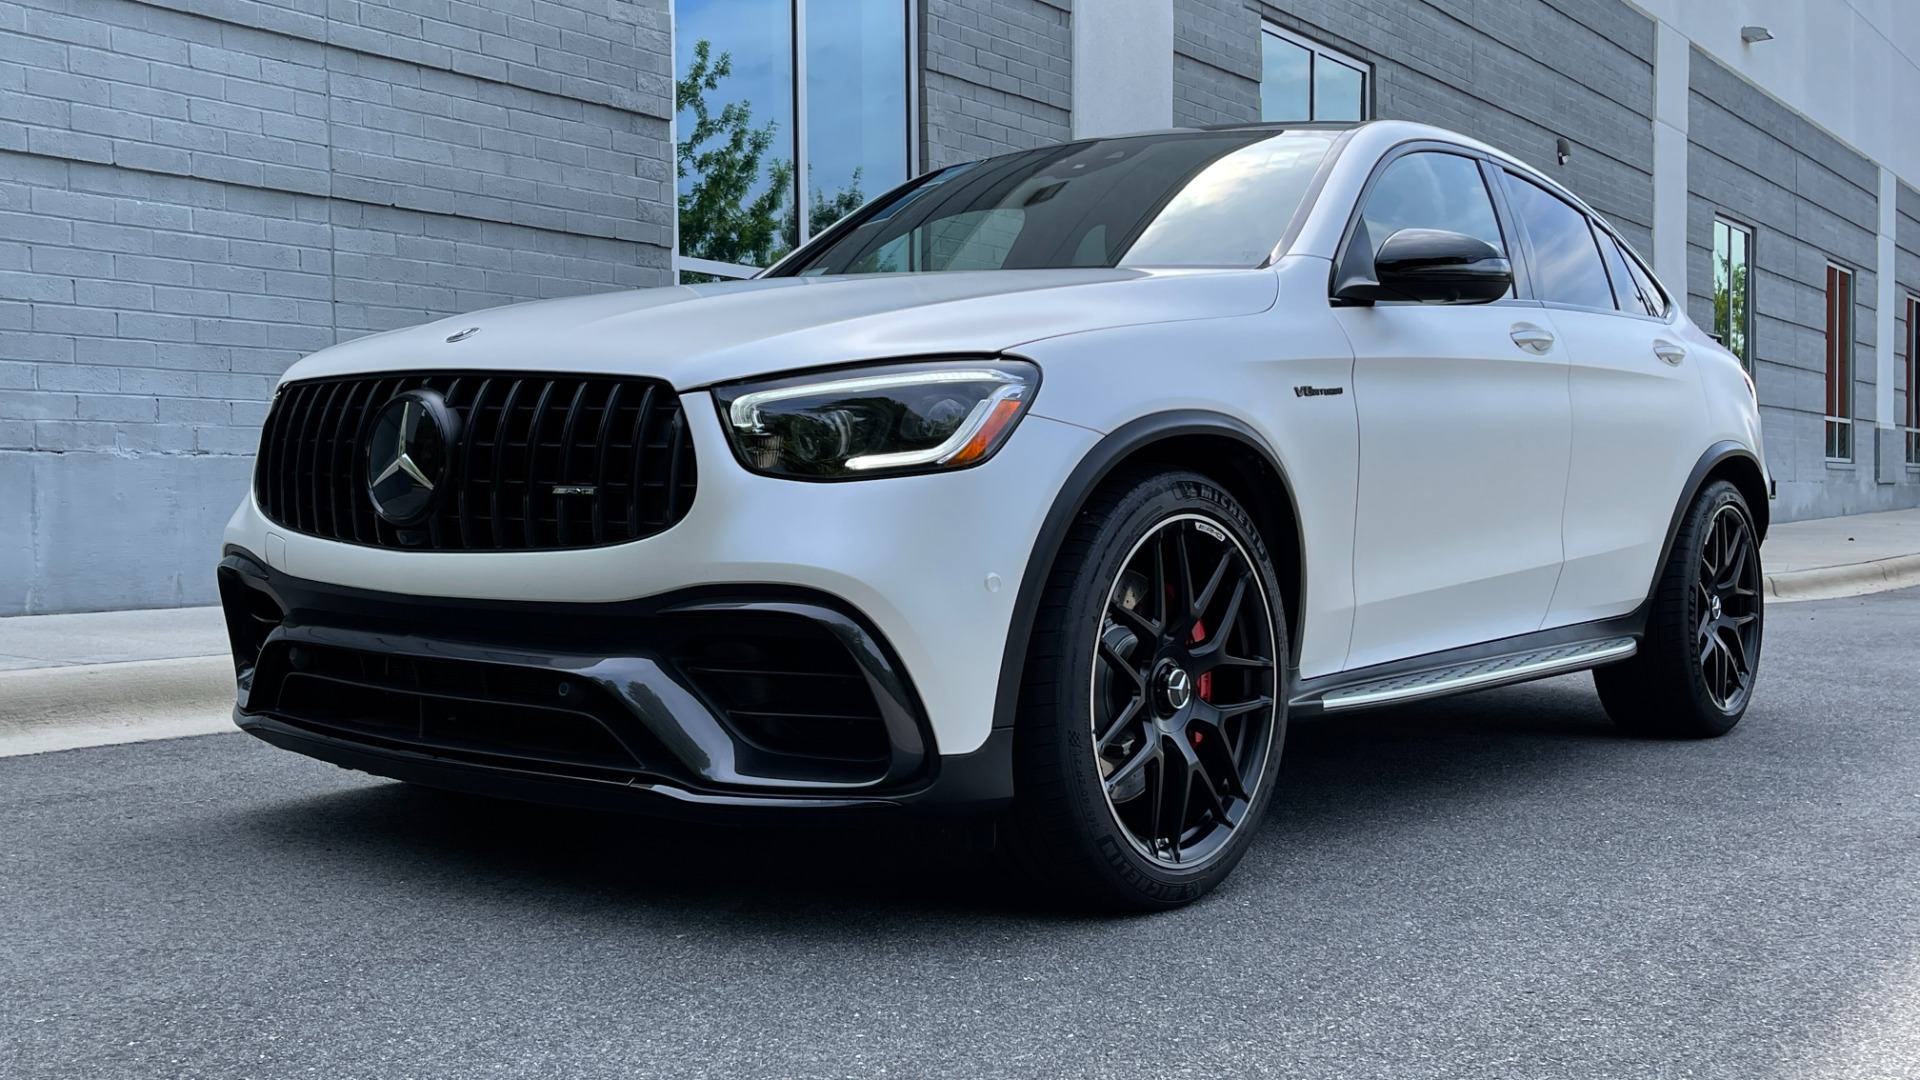 Used 2021 Mercedes-Benz GLC 63 S AMG 503HP SUV / DRVR ASST / LIGHTING / AMG NIGHT for sale $94,995 at Formula Imports in Charlotte NC 28227 3